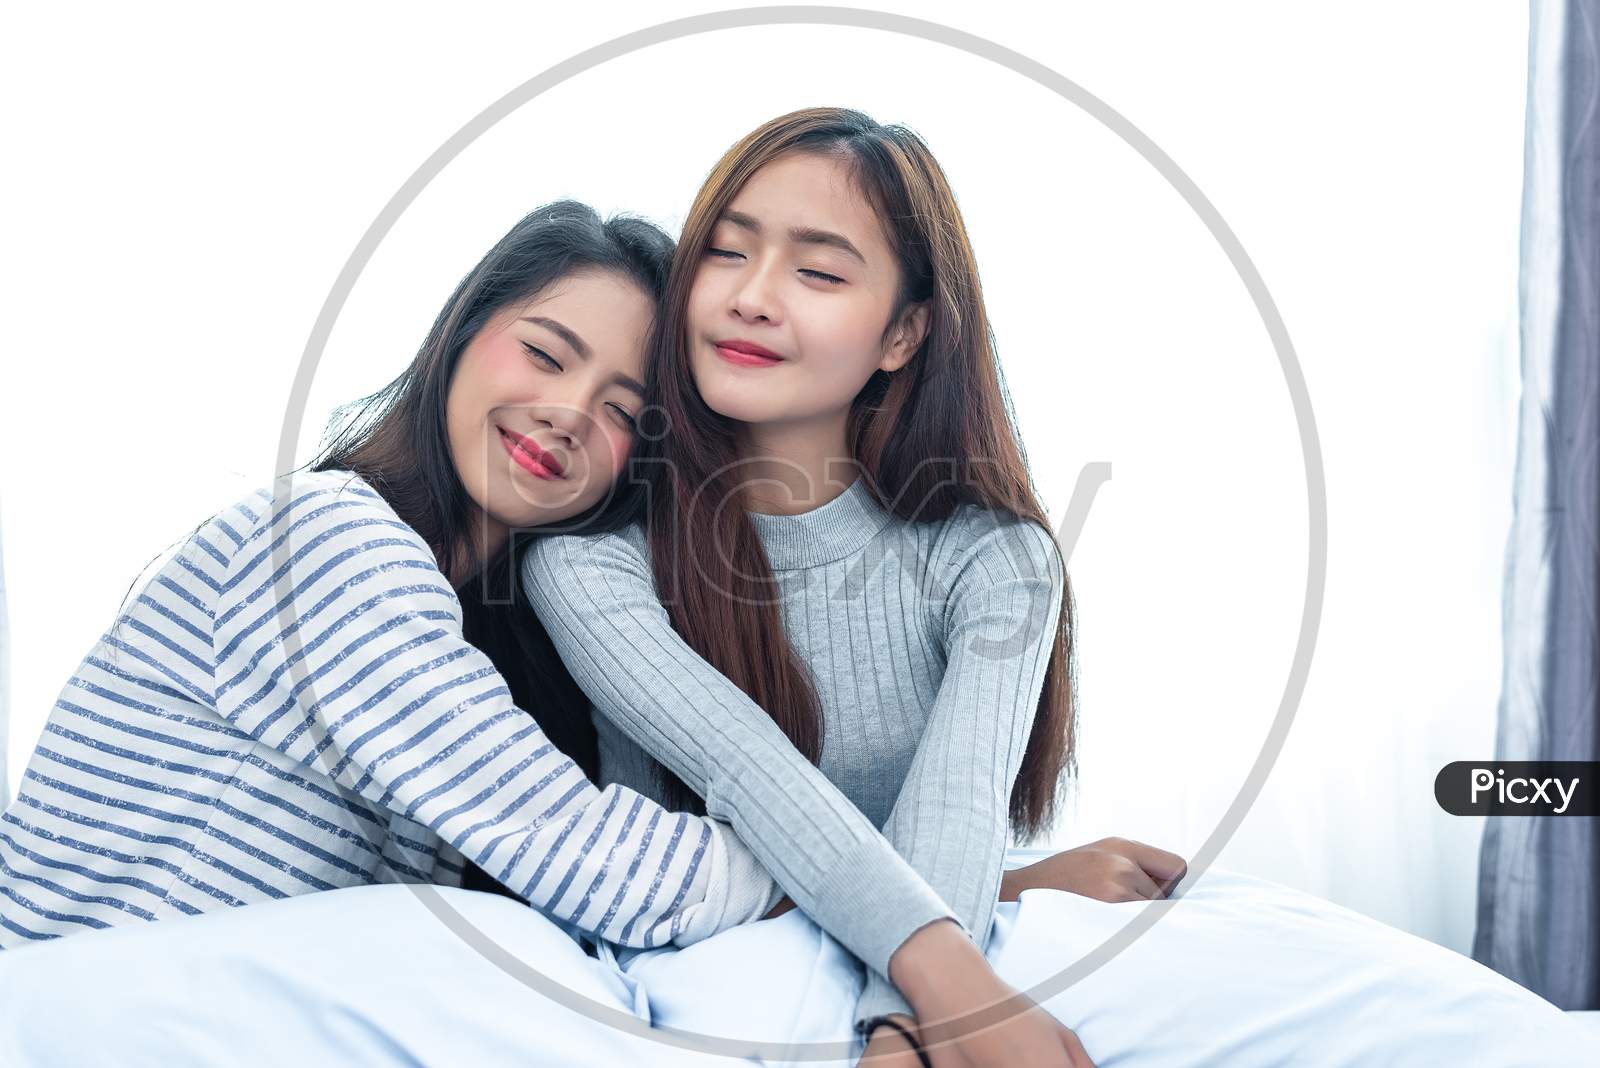 Two Asian Lesbian Hug Together In Bedroom. Beauty Concept. Happy Lifestyle And Home Sweet Home Theme. Cushion Pillow Element And Window Curtain Background. Love Scene Of Lovers